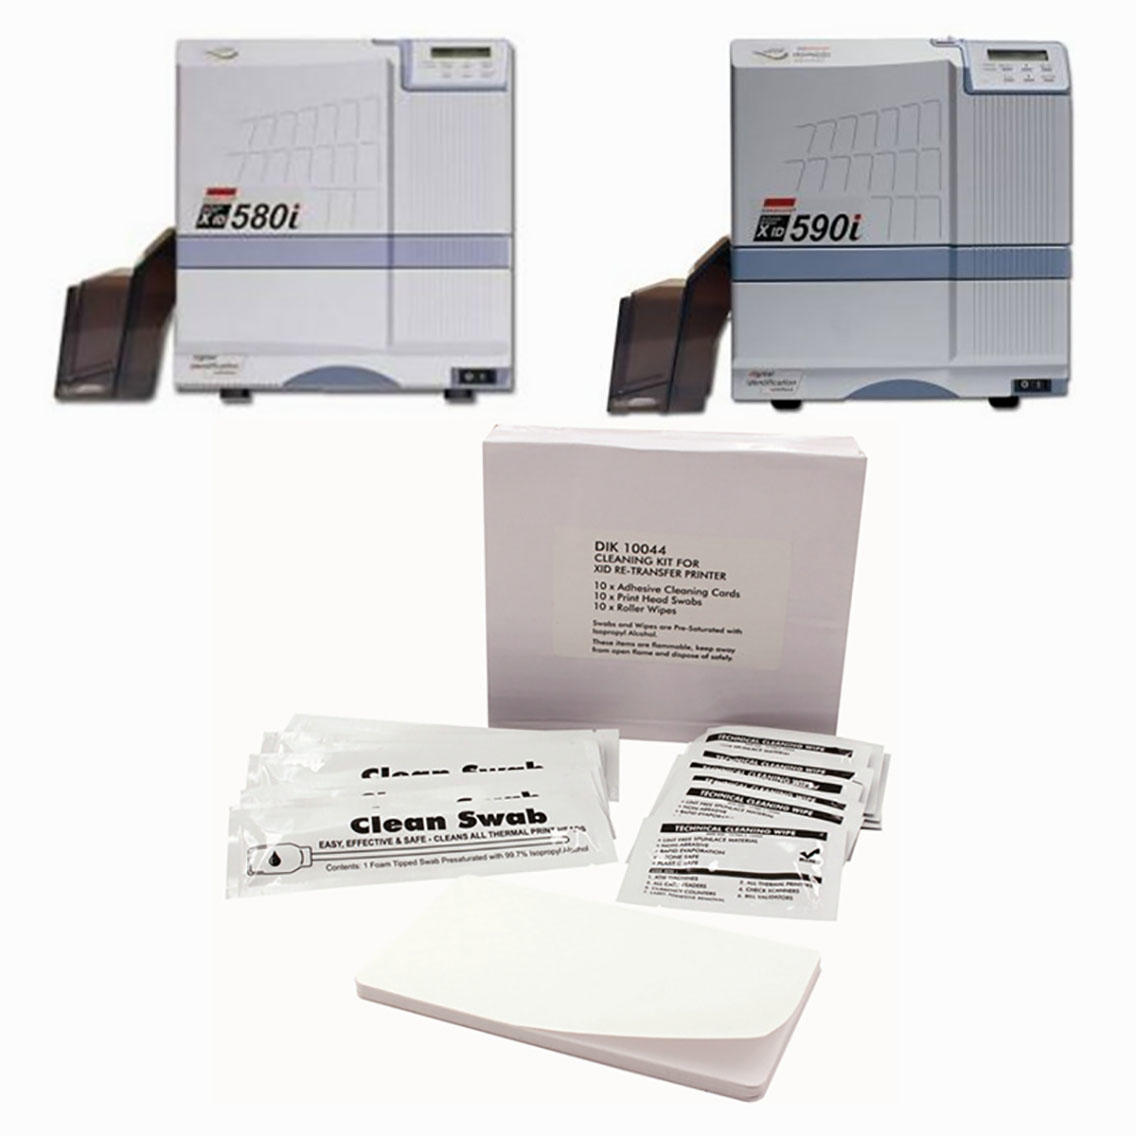 Cleanmo good quality inkjet printhead cleaning kit manufacturer for XID 580i printer